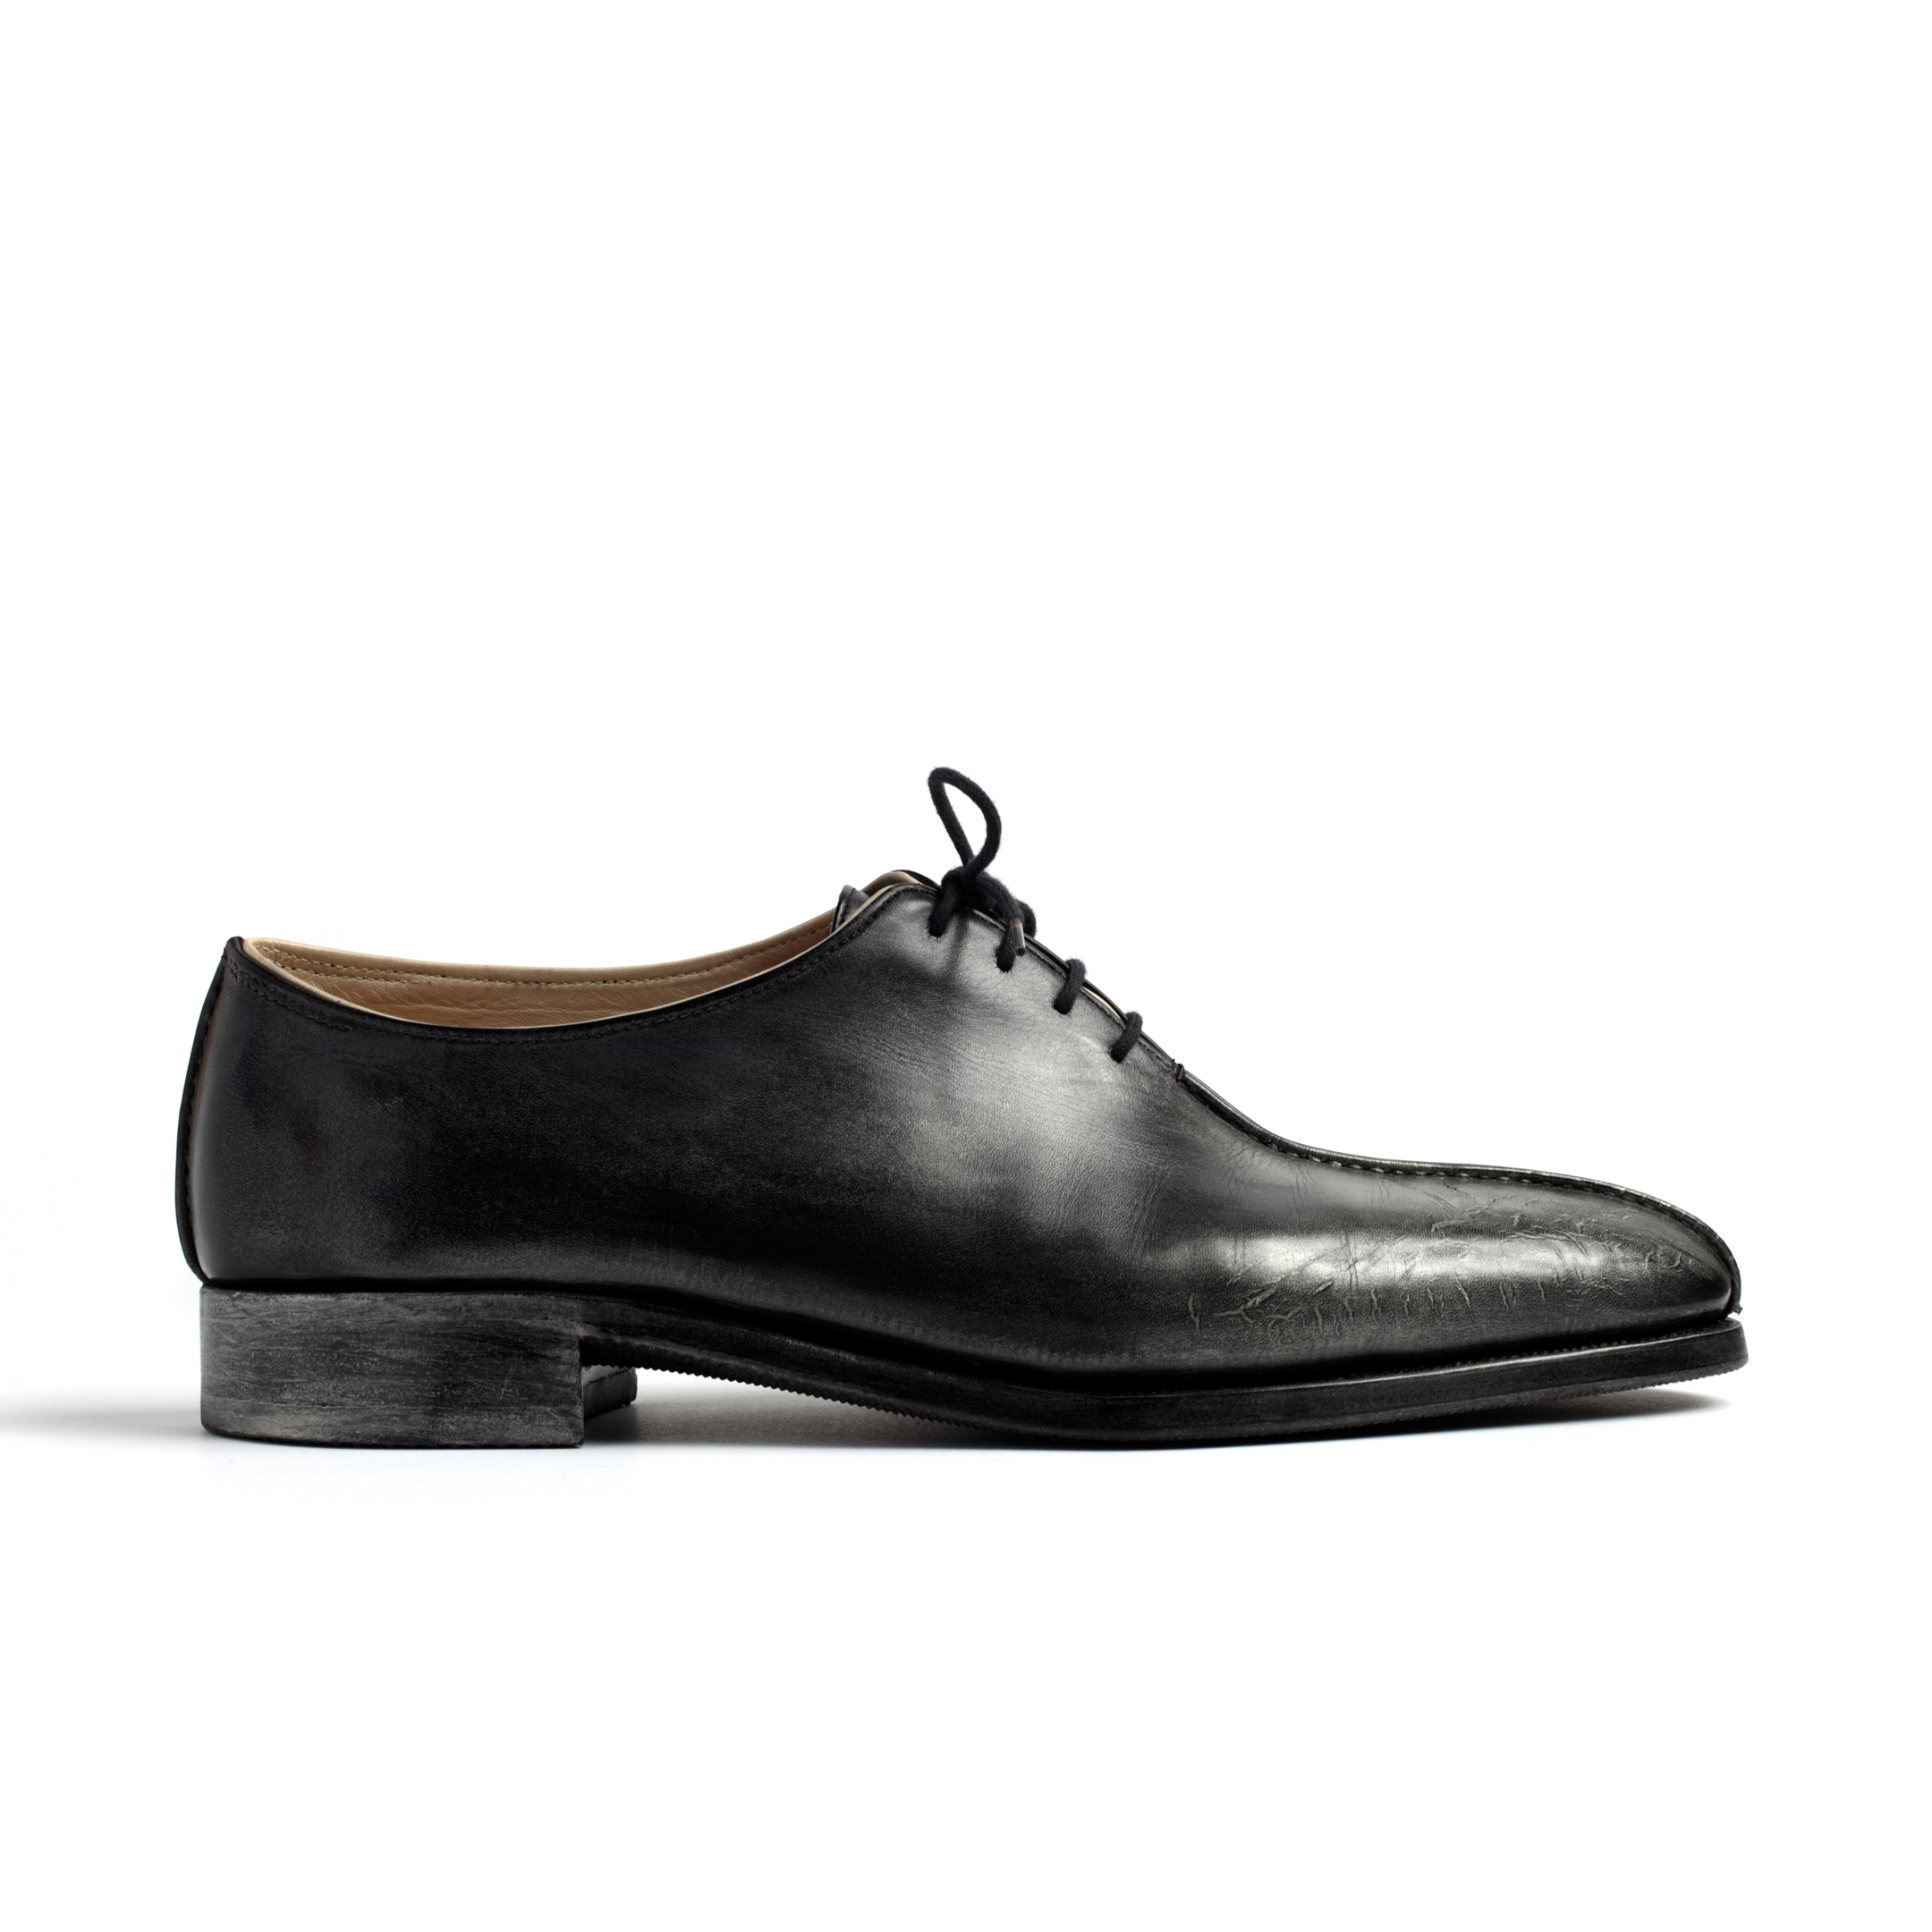 Bespoke Shoes - Scheer GmbH | Pure and focused - following up 7 